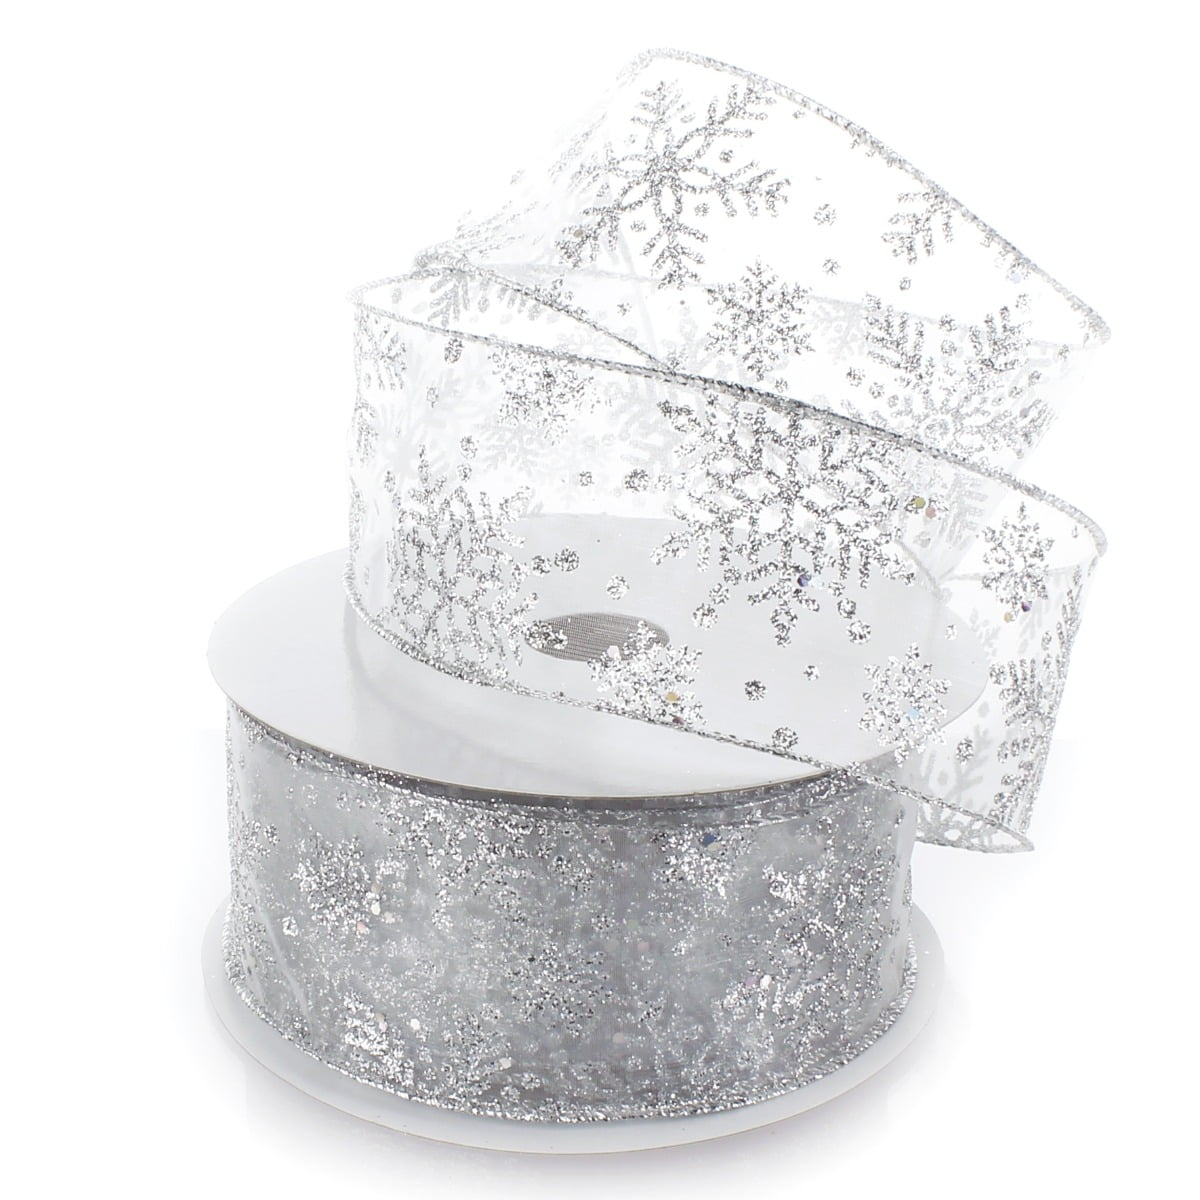 Wired White Spangle Glitter Ribbon 2 1/2 Inch Wedding Winter Christmas  Holiday July 4th 